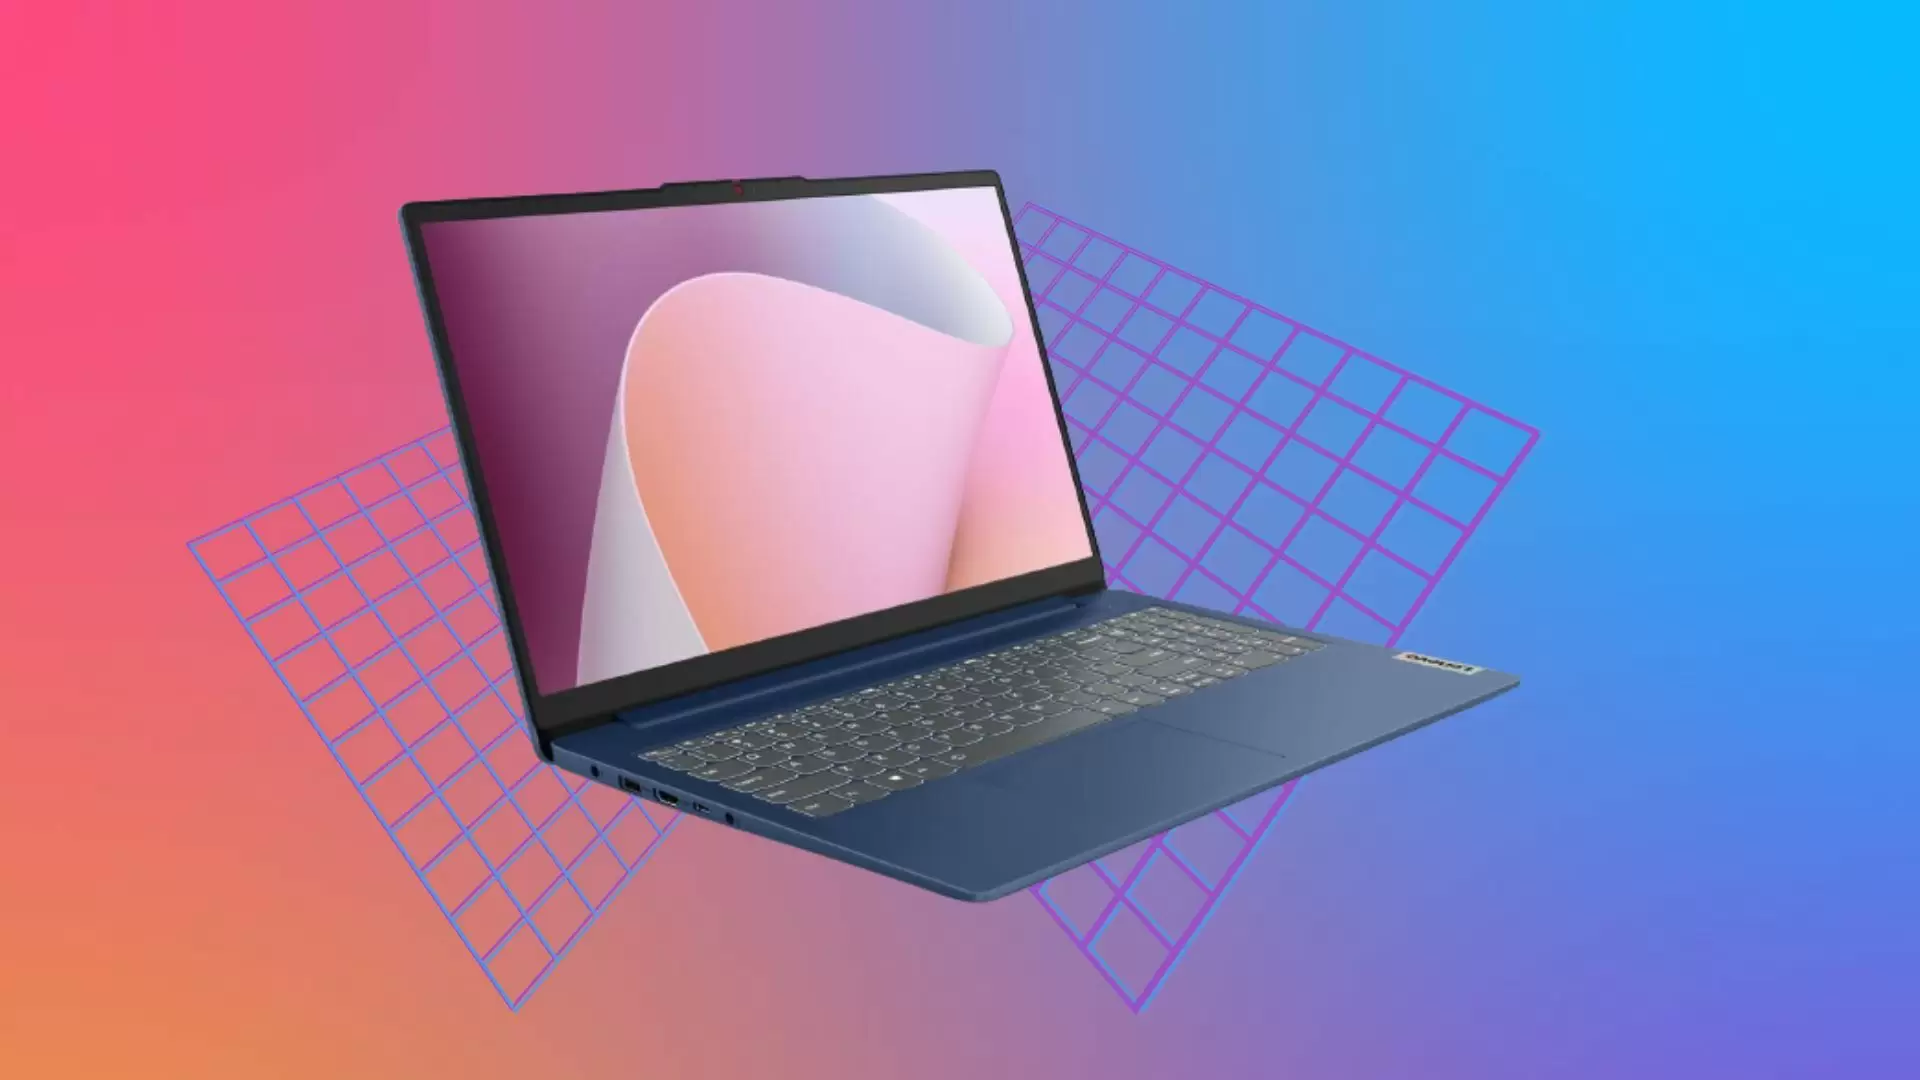 The 9 best laptops under $500 that are actually worth buying